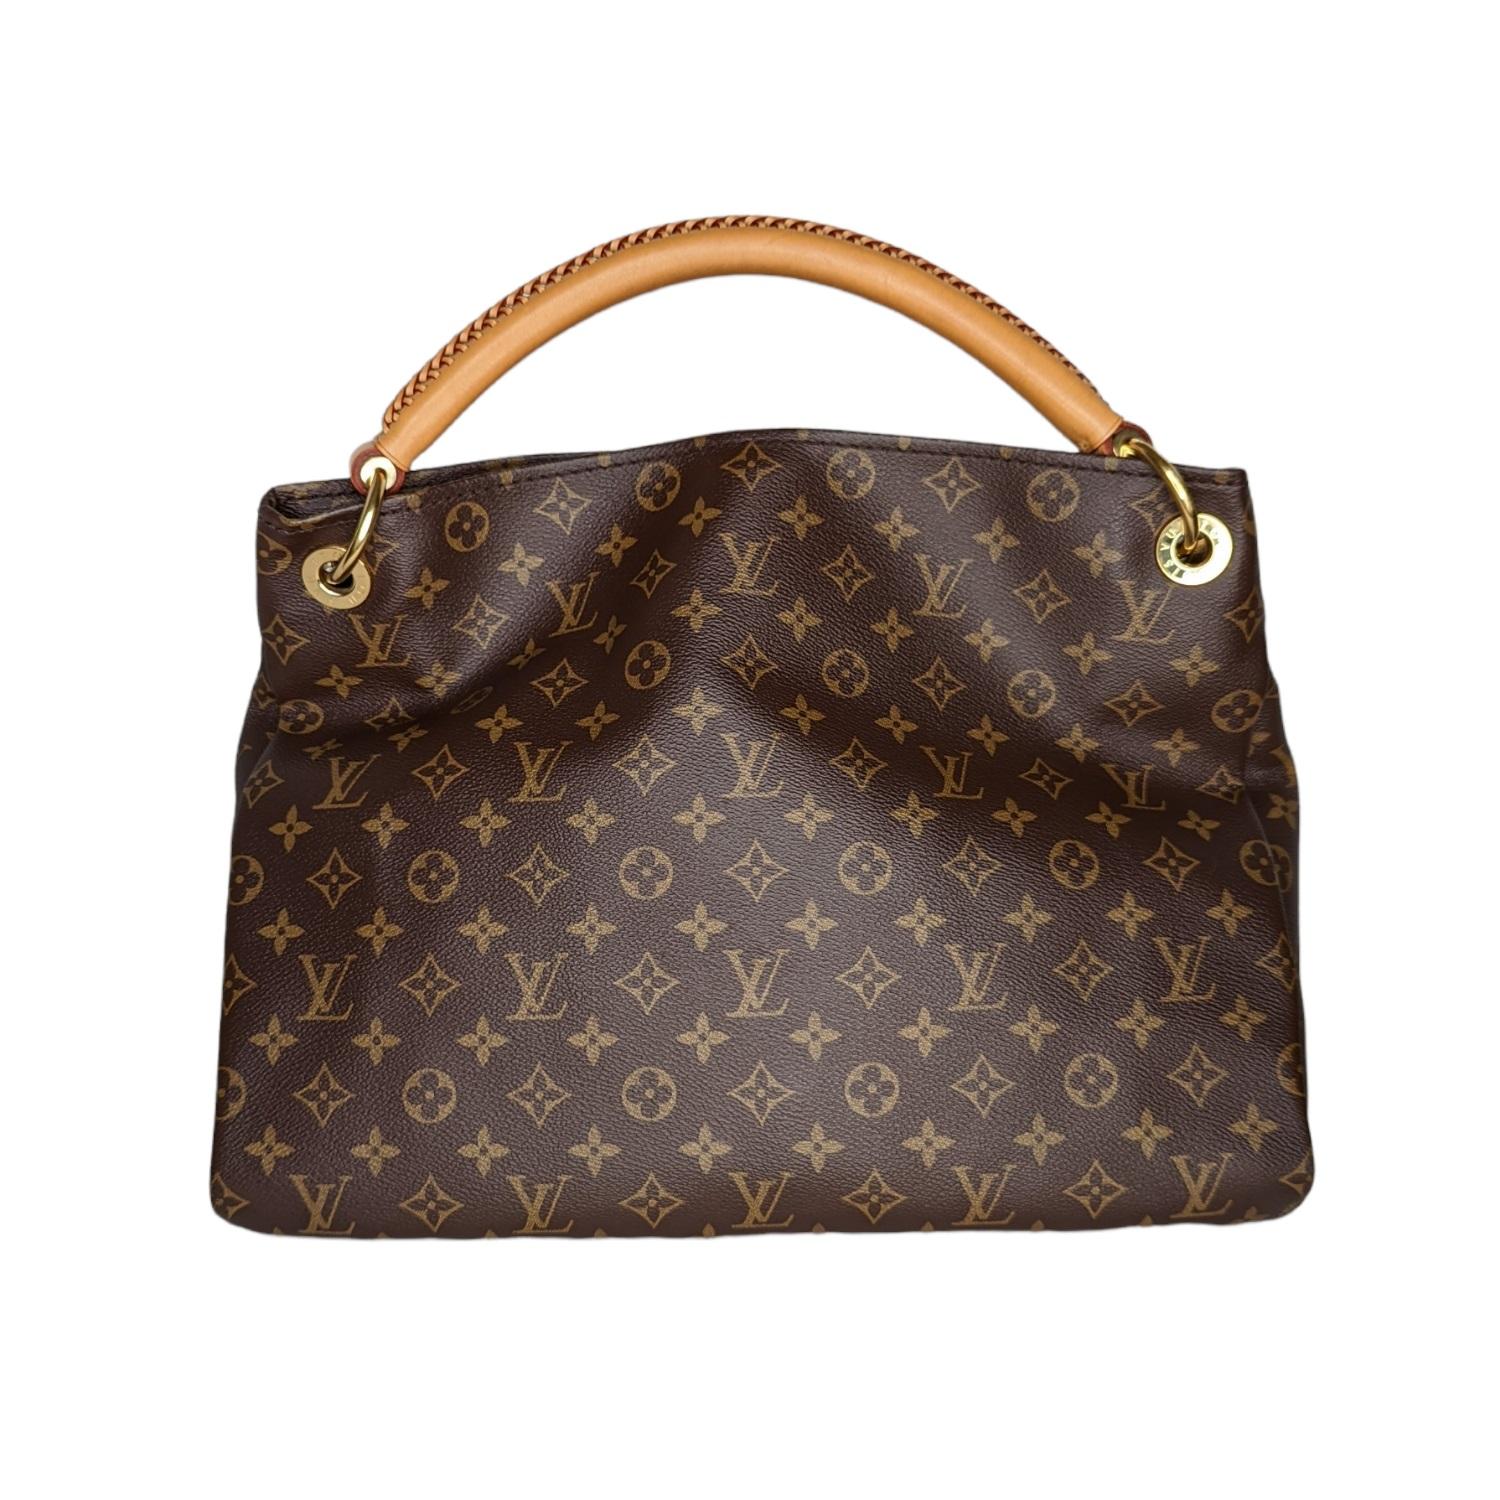 The Louis Vuitton Monogram Canvas Artsy MM Bag has a unique and modern structure. This roomy tote makes a perfect work or weekend bag, large enough to hold all your essentials in style. It features a detachable stylish Louis Vuitton key ring for